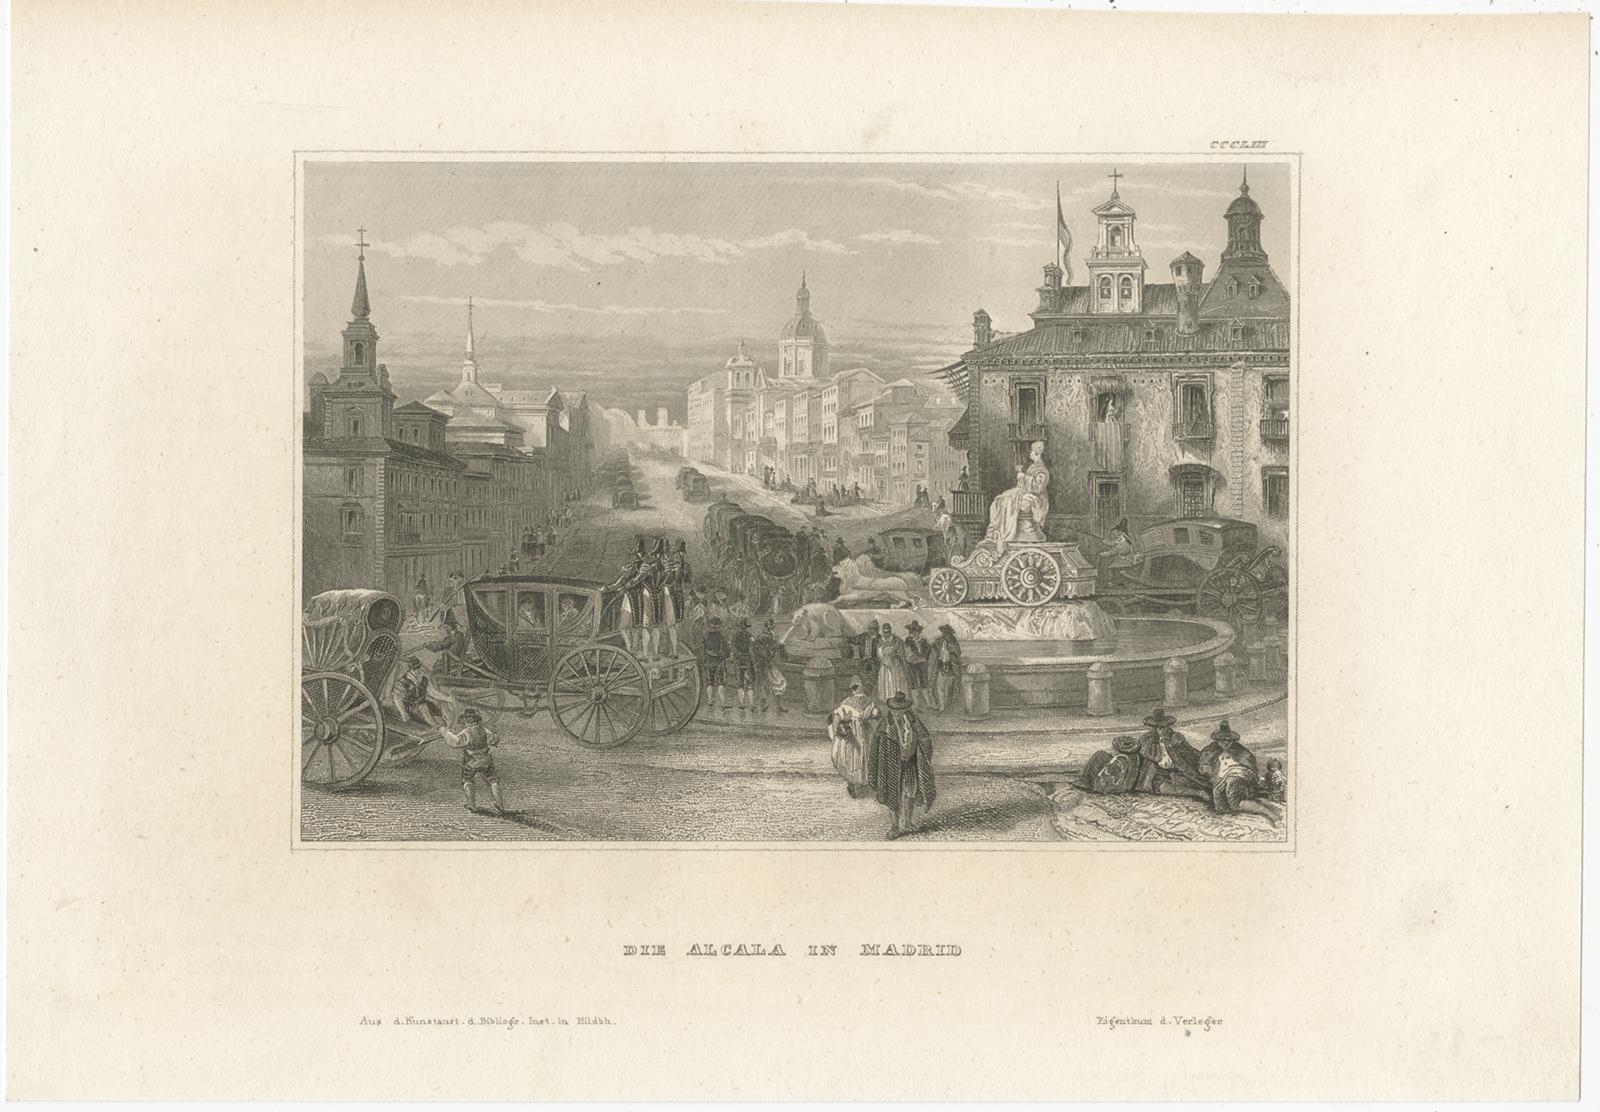 Antique print titled 'Die Alcala in Madrid'. View of the Calle de Alcalá, it is among the longest streets in Madrid. Originates from 'Meyers Universum'. Published circa 1840.

Joseph Meyer (May 9, 1796 - June 27, 1856) was a German industrialist